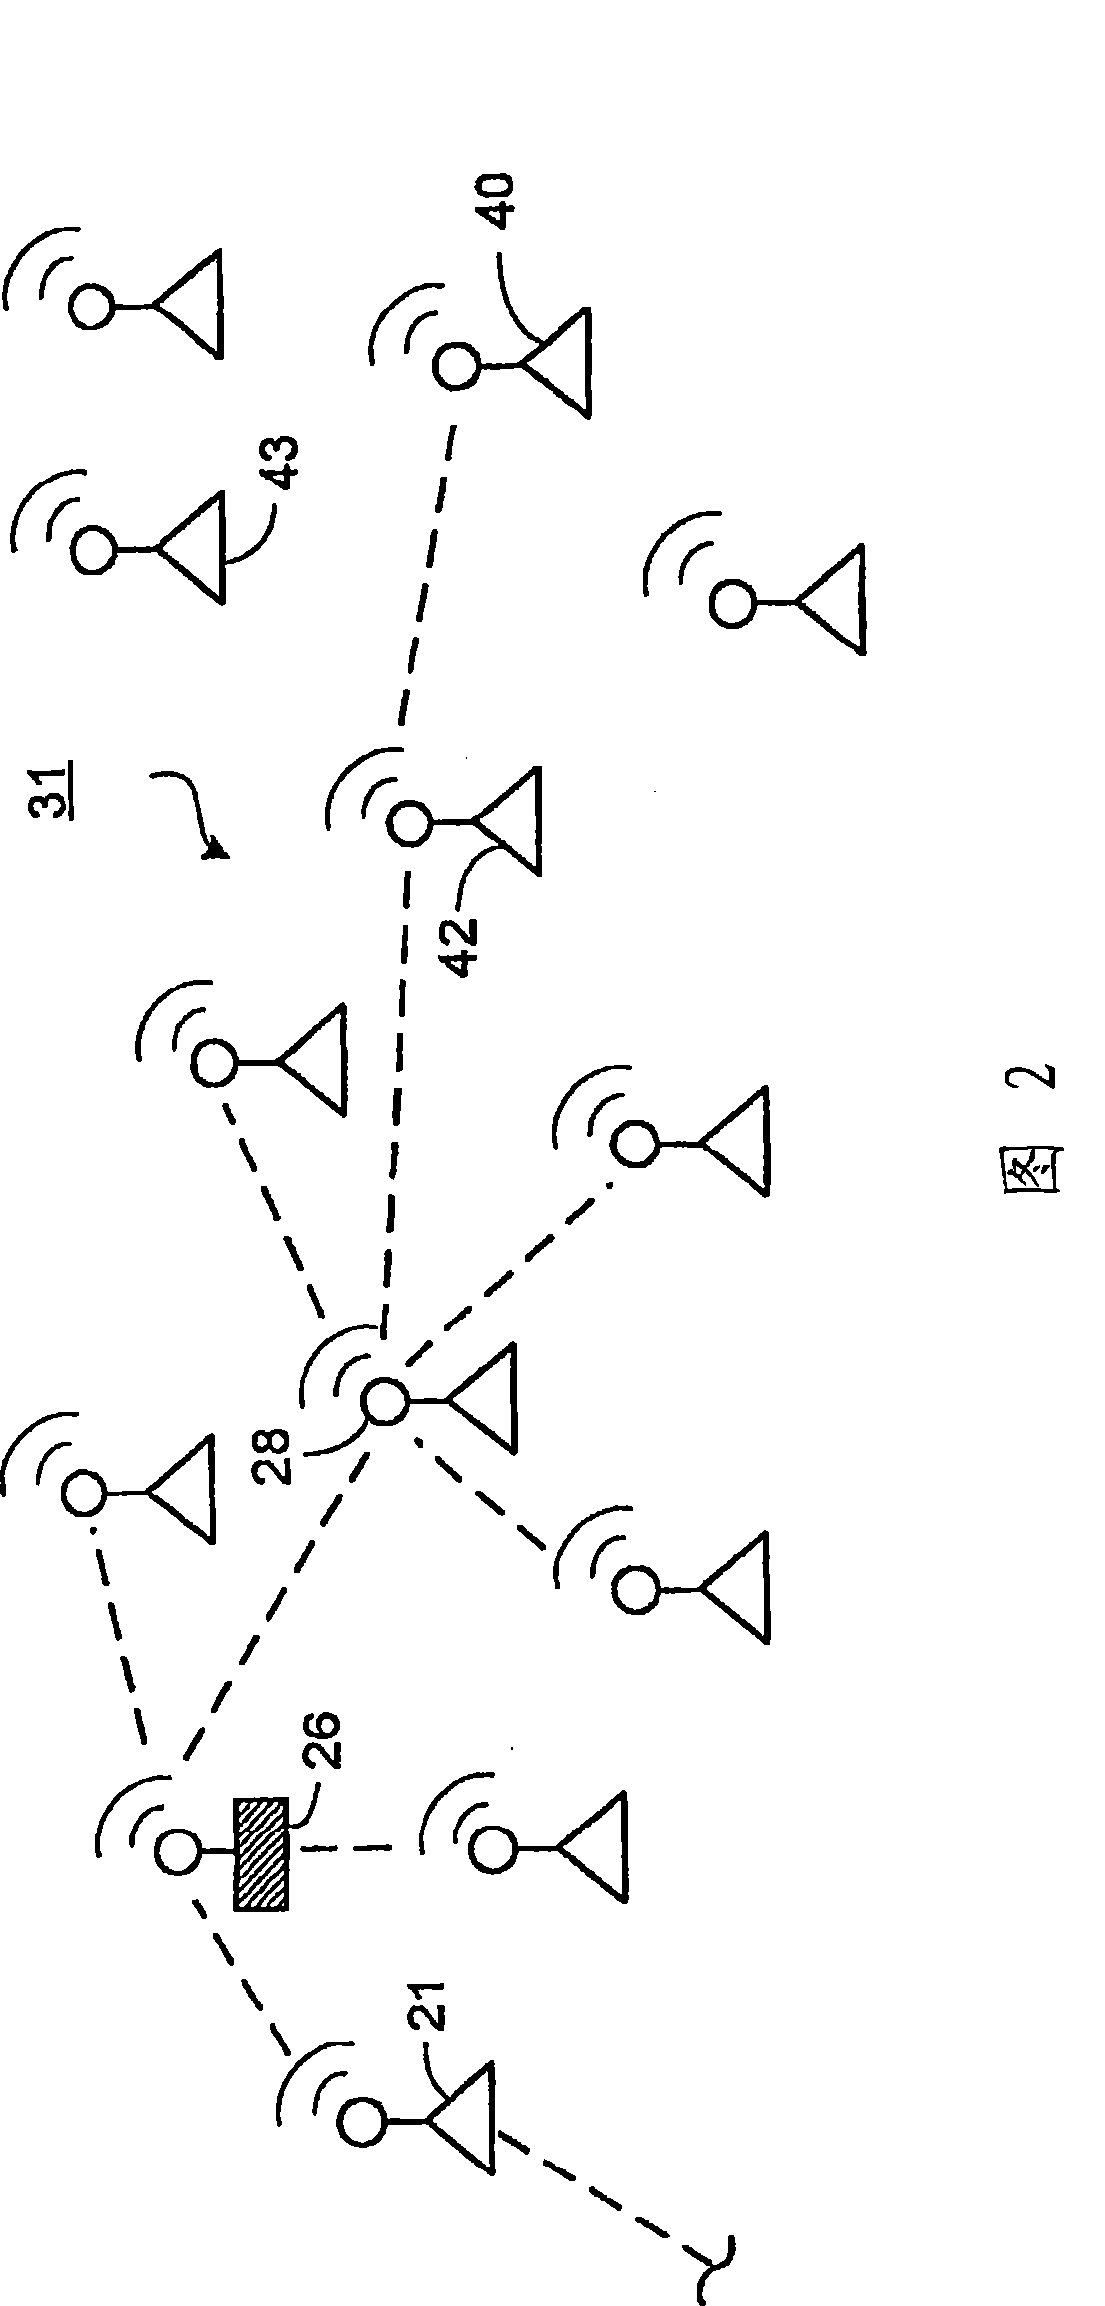 Communicating over a wireless network